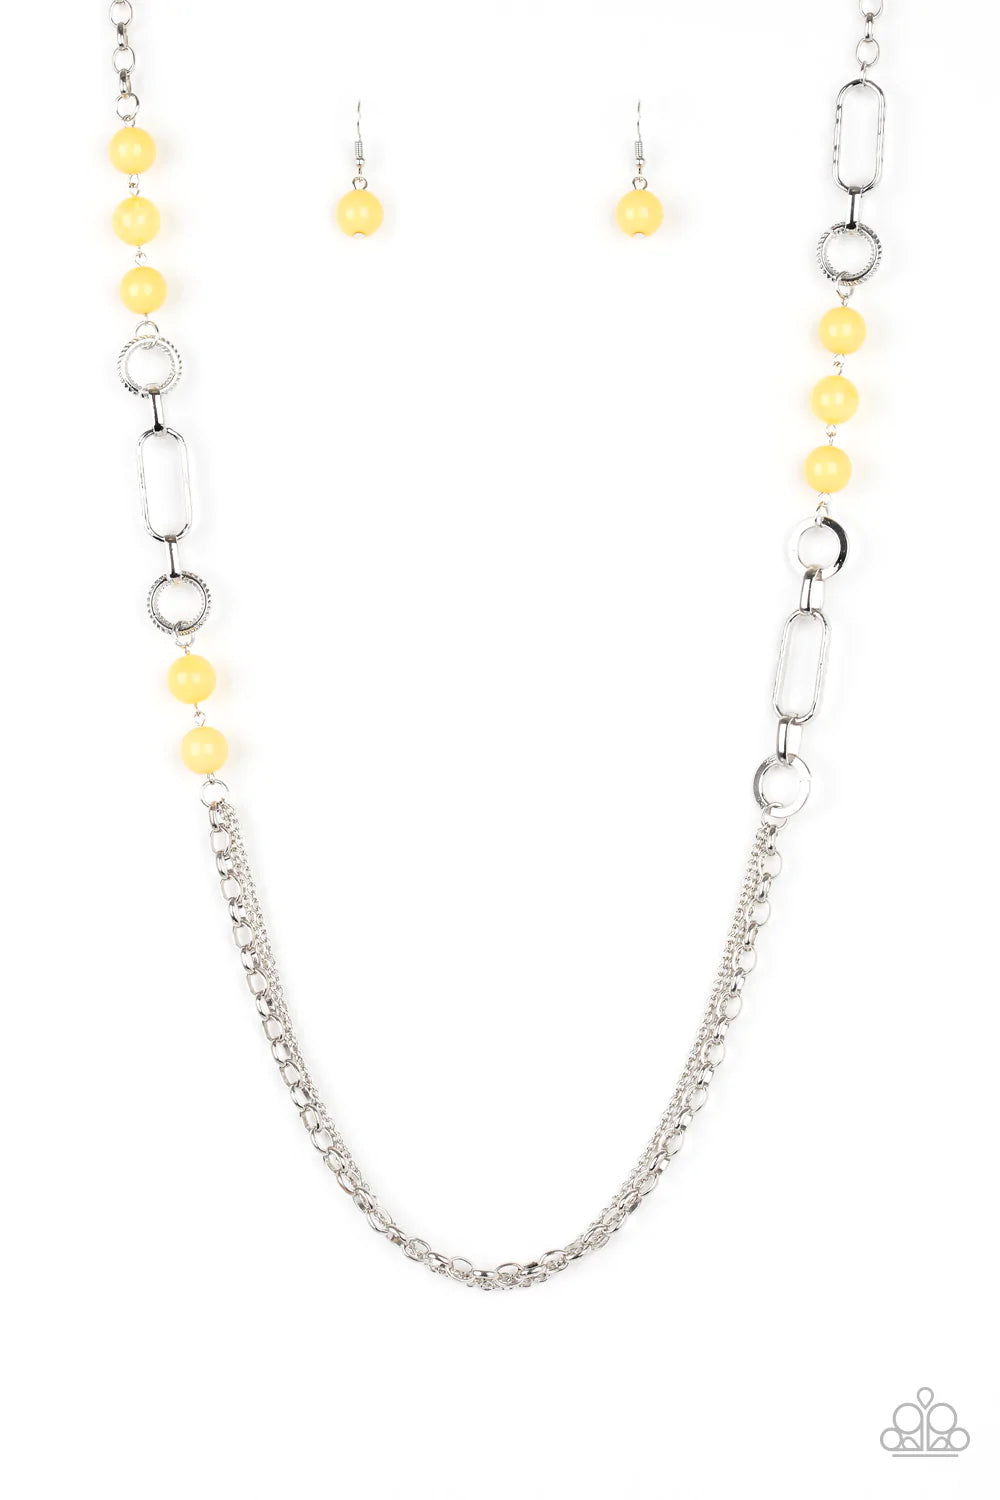 Paparazzi - CACHE Me Out - Yellow - Necklace